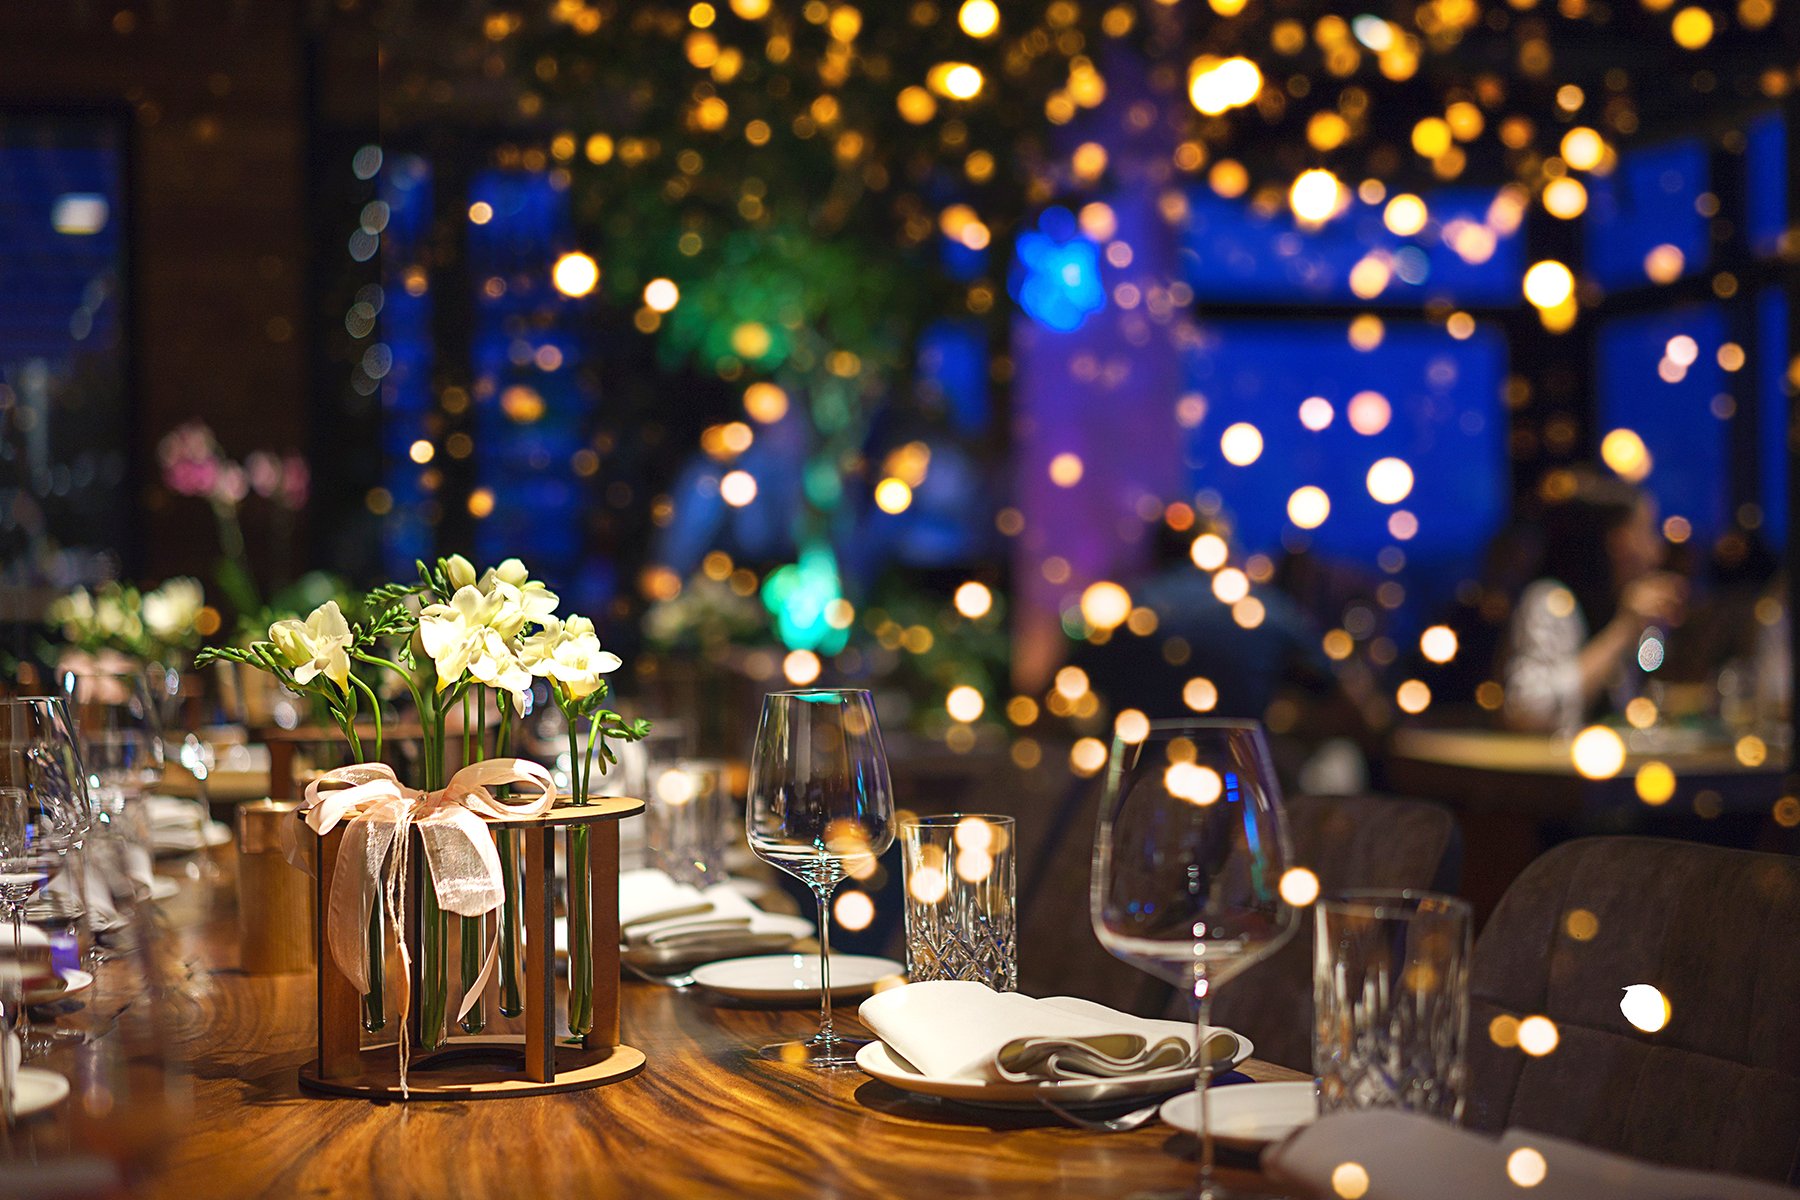 Holiday Dinner Table with Glassware and Warm Bokeh Lights in Background.jpg